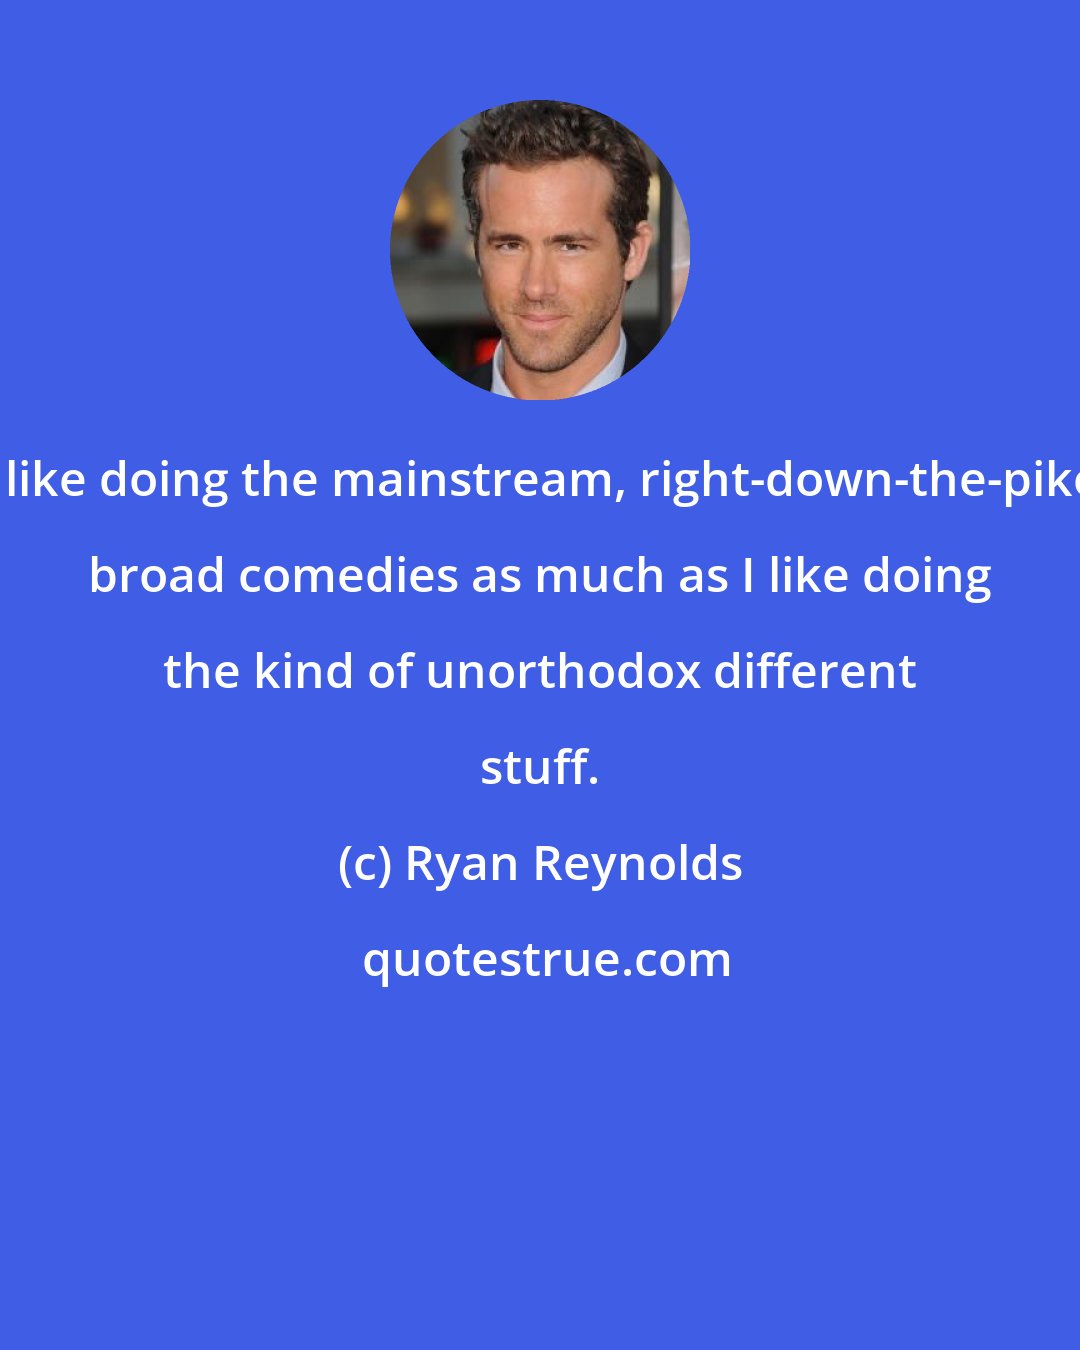 Ryan Reynolds: I like doing the mainstream, right-down-the-pike broad comedies as much as I like doing the kind of unorthodox different stuff.